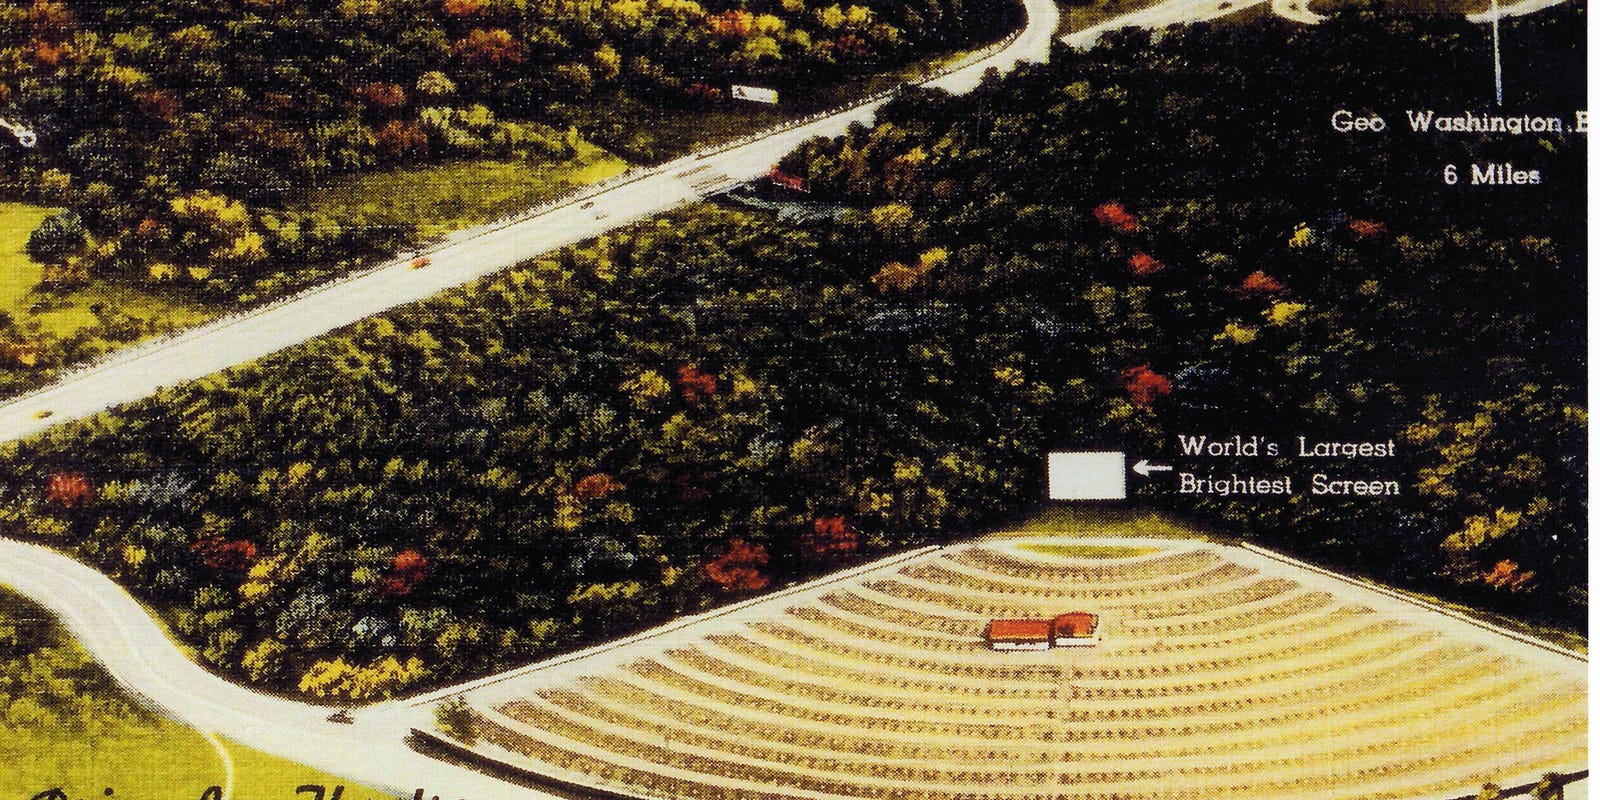 Paramus Mall Parking Lot Was Once A Drive In Cinema Under The Stars